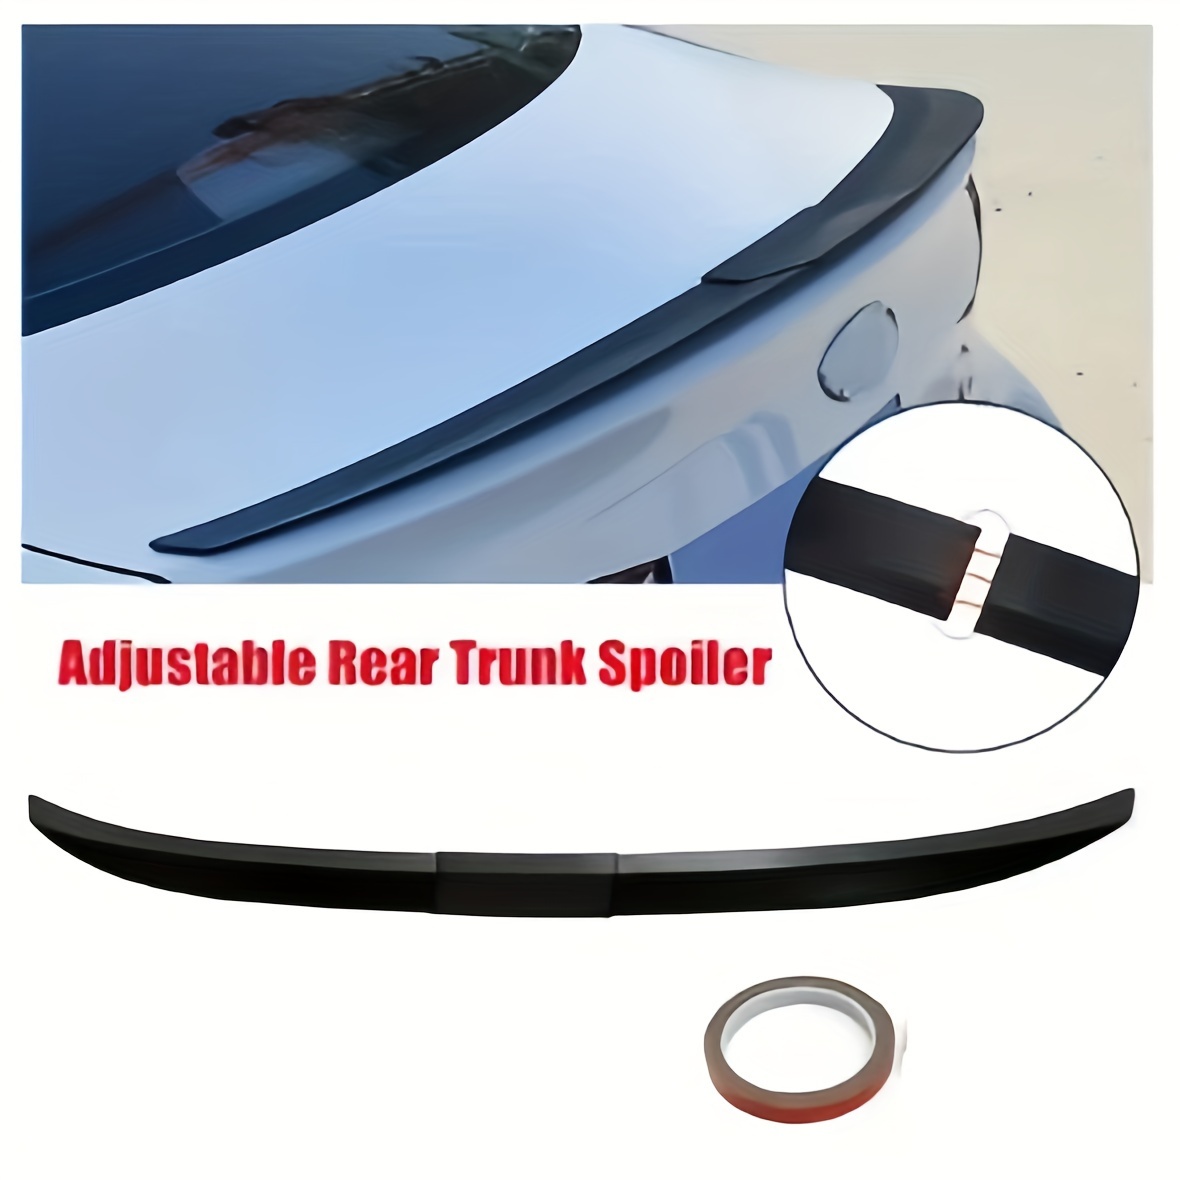 

Universal Adjustable 3-section Rear Trunk Spoiler, Car Roof Vortex Generator, No-drill Easy Install Fixed Wing, Abs Polishing Finish, Performance Upgrade & Enhancement Accessory For Vehicle Aesthetics